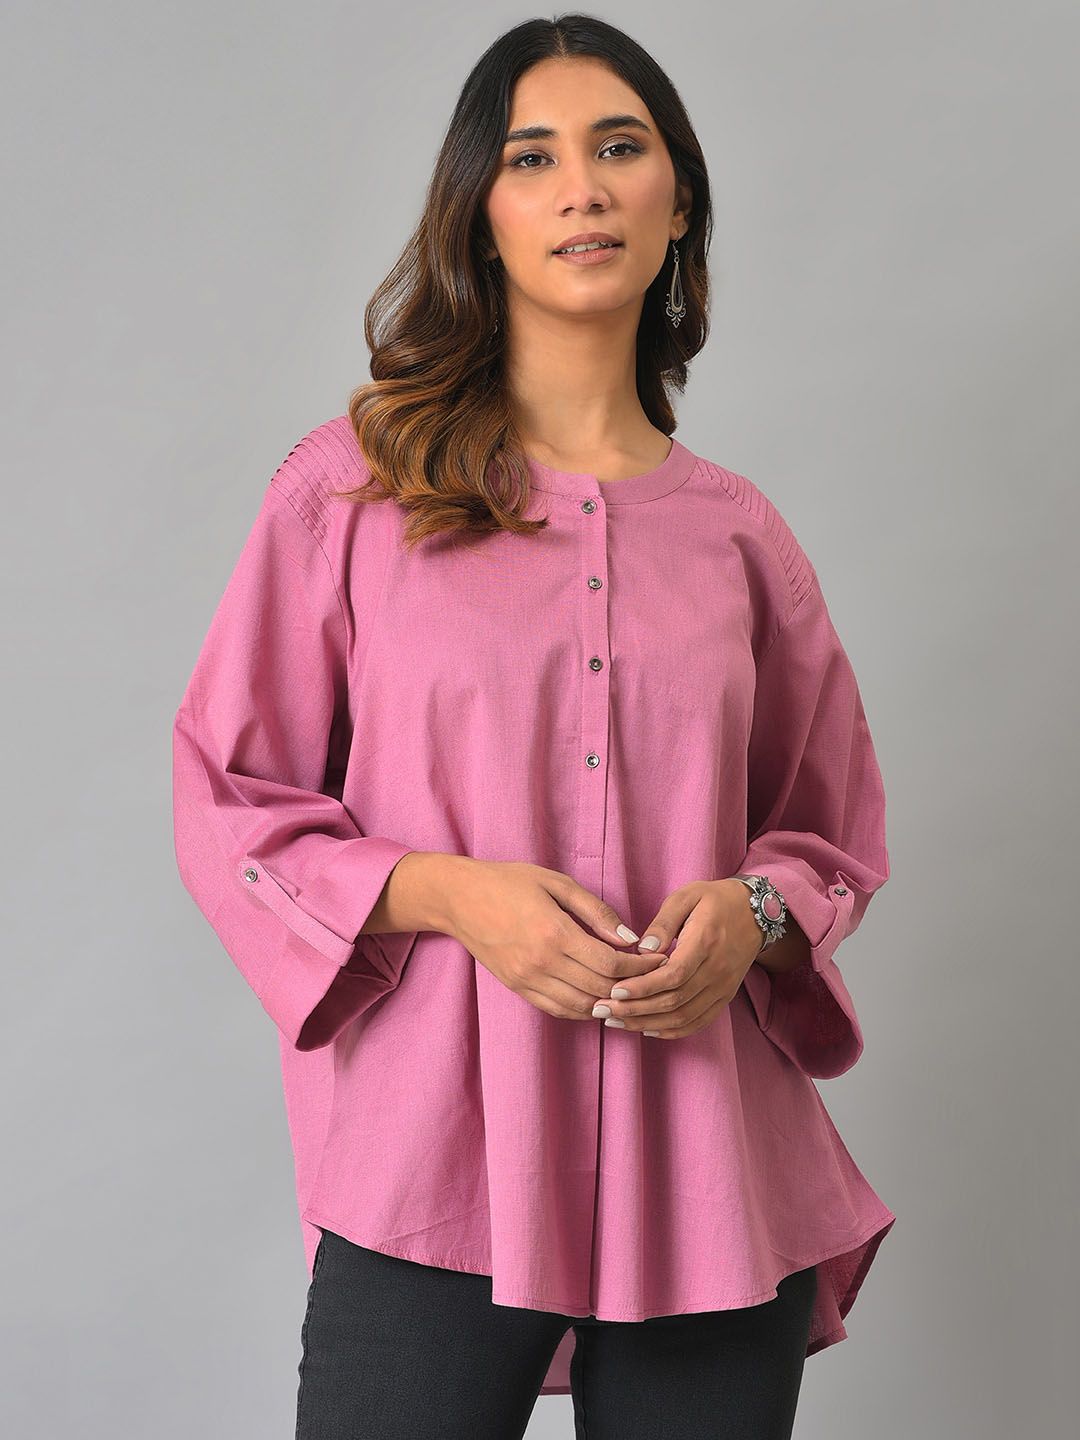 W Shirt Style Top Price in India